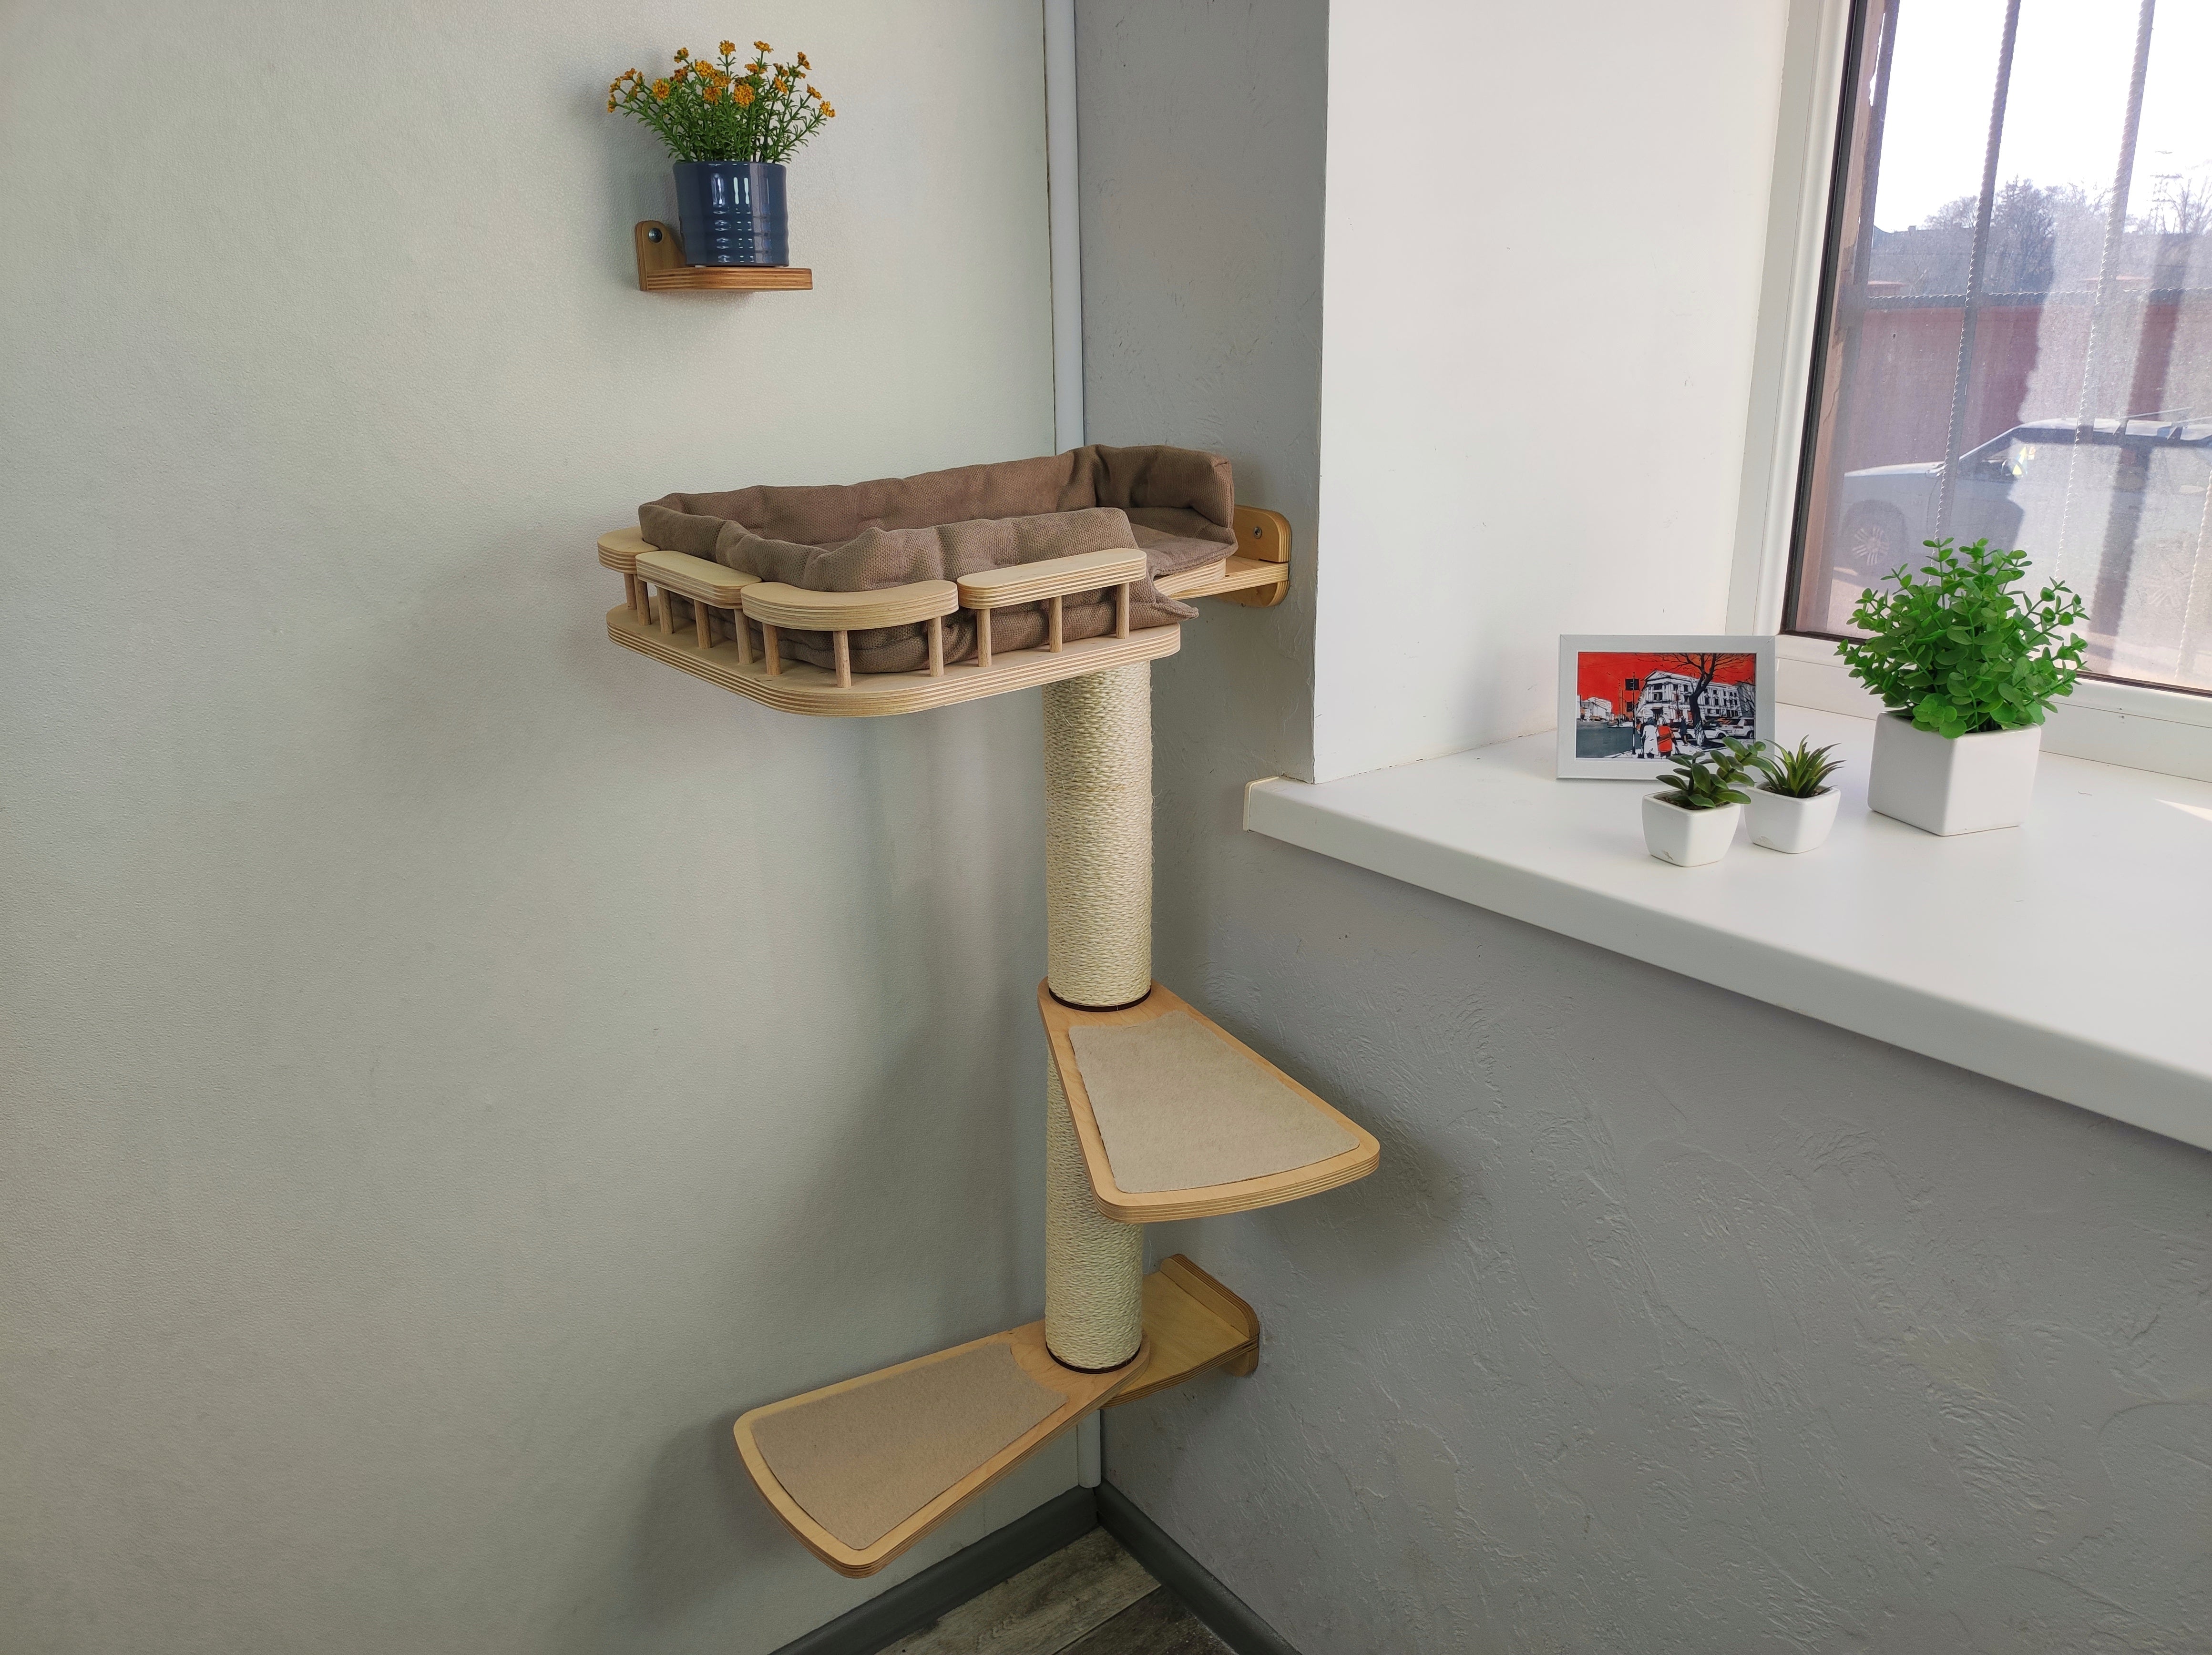 Cat wall shelf with scratching post by the window